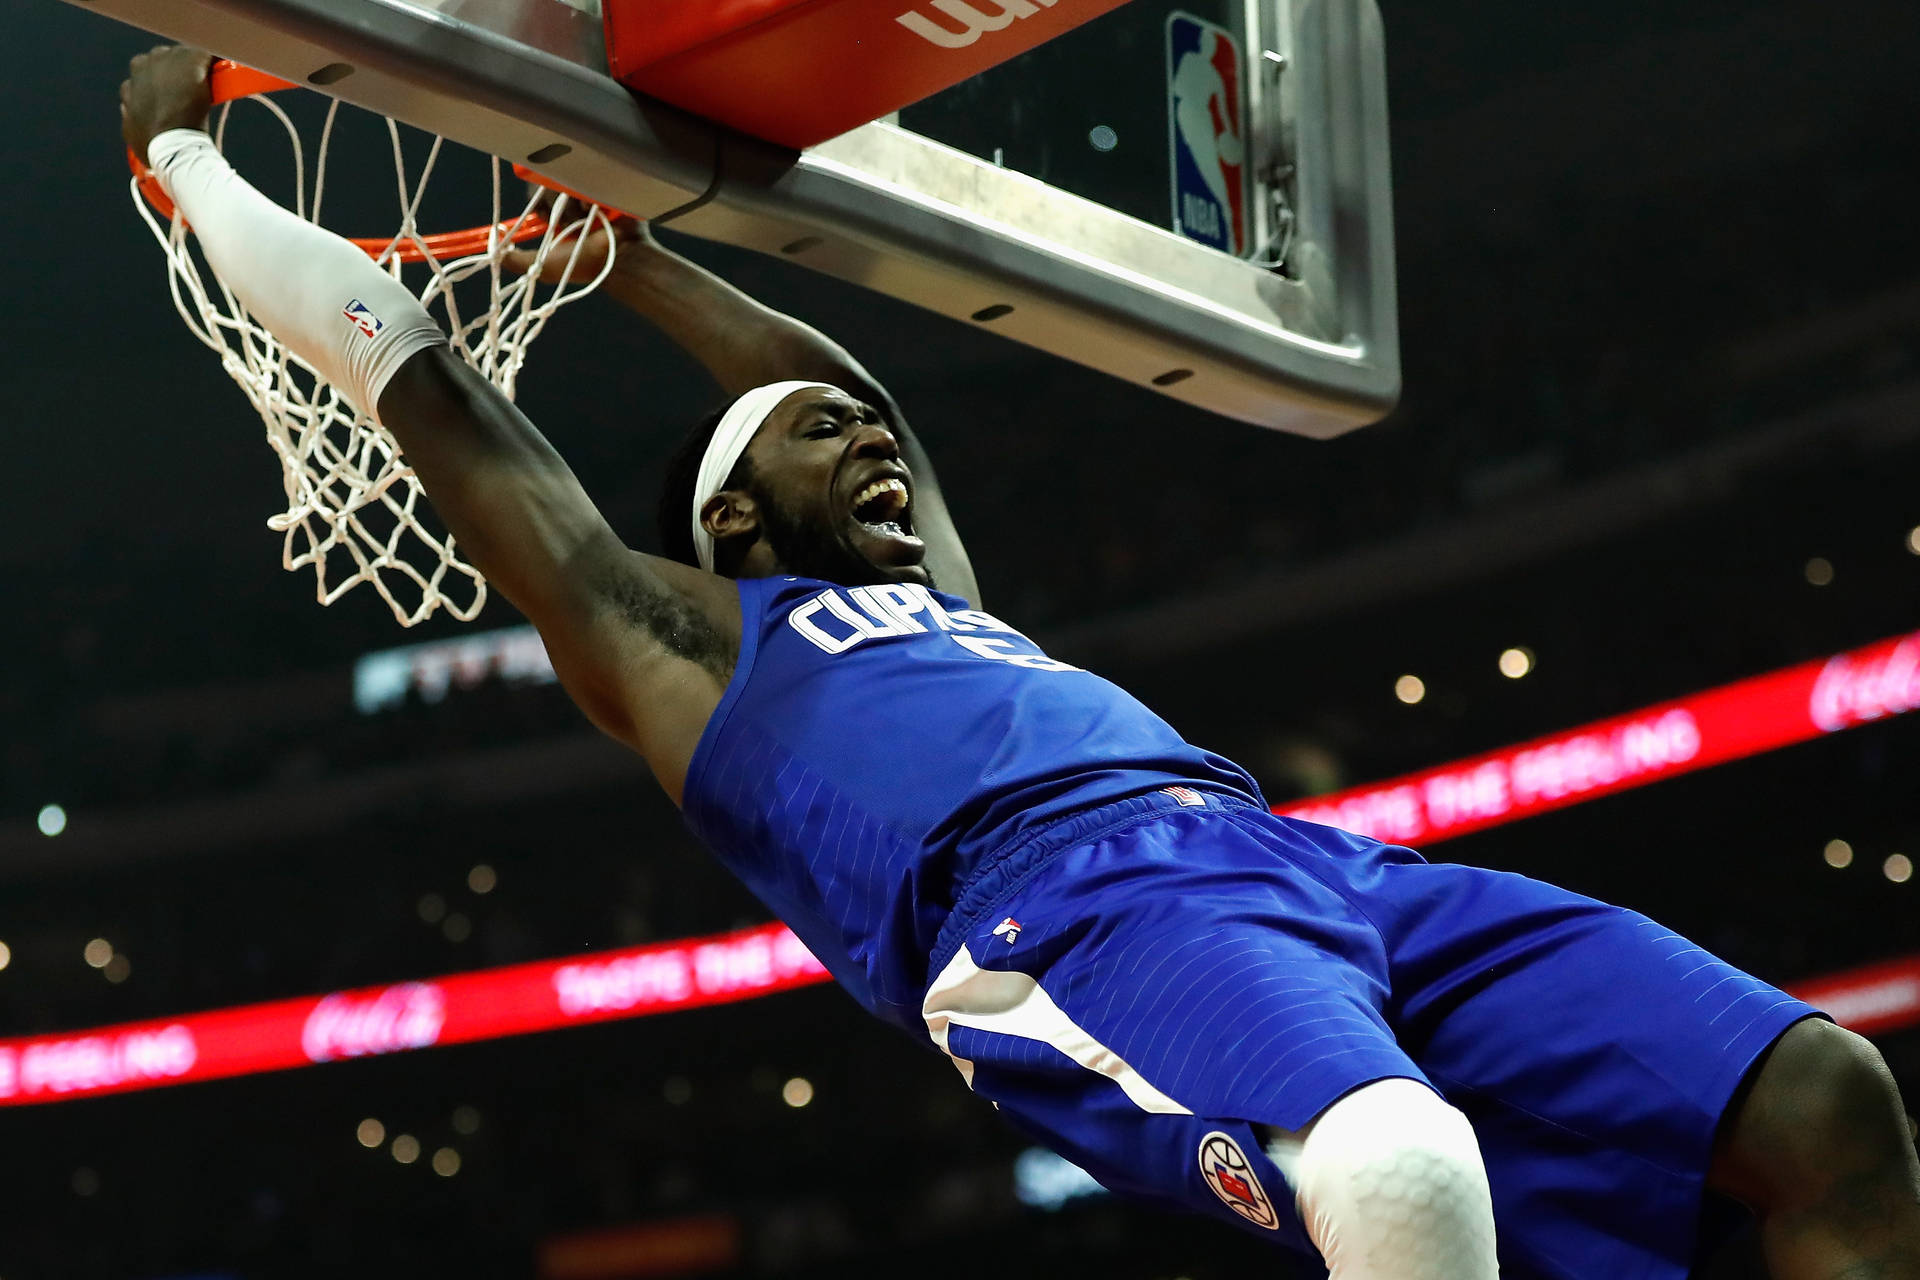 Montrezl Harrell In Action - Dunking With Power